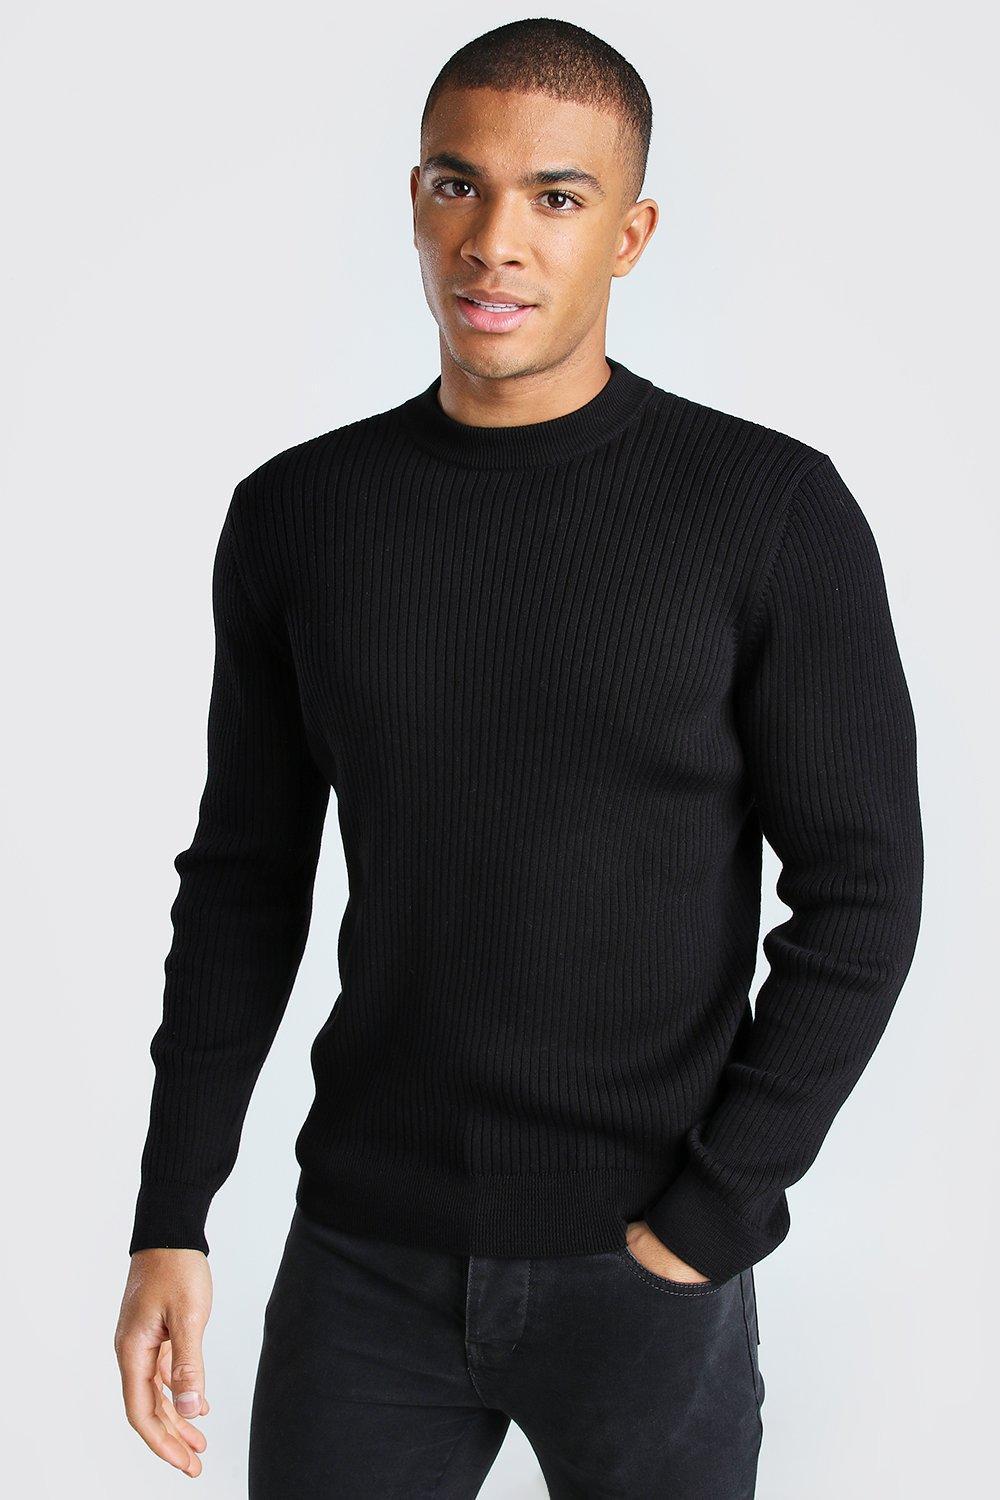 BoohooMAN Ribbed Turtle Neck Sweater in Black for Men - Lyst